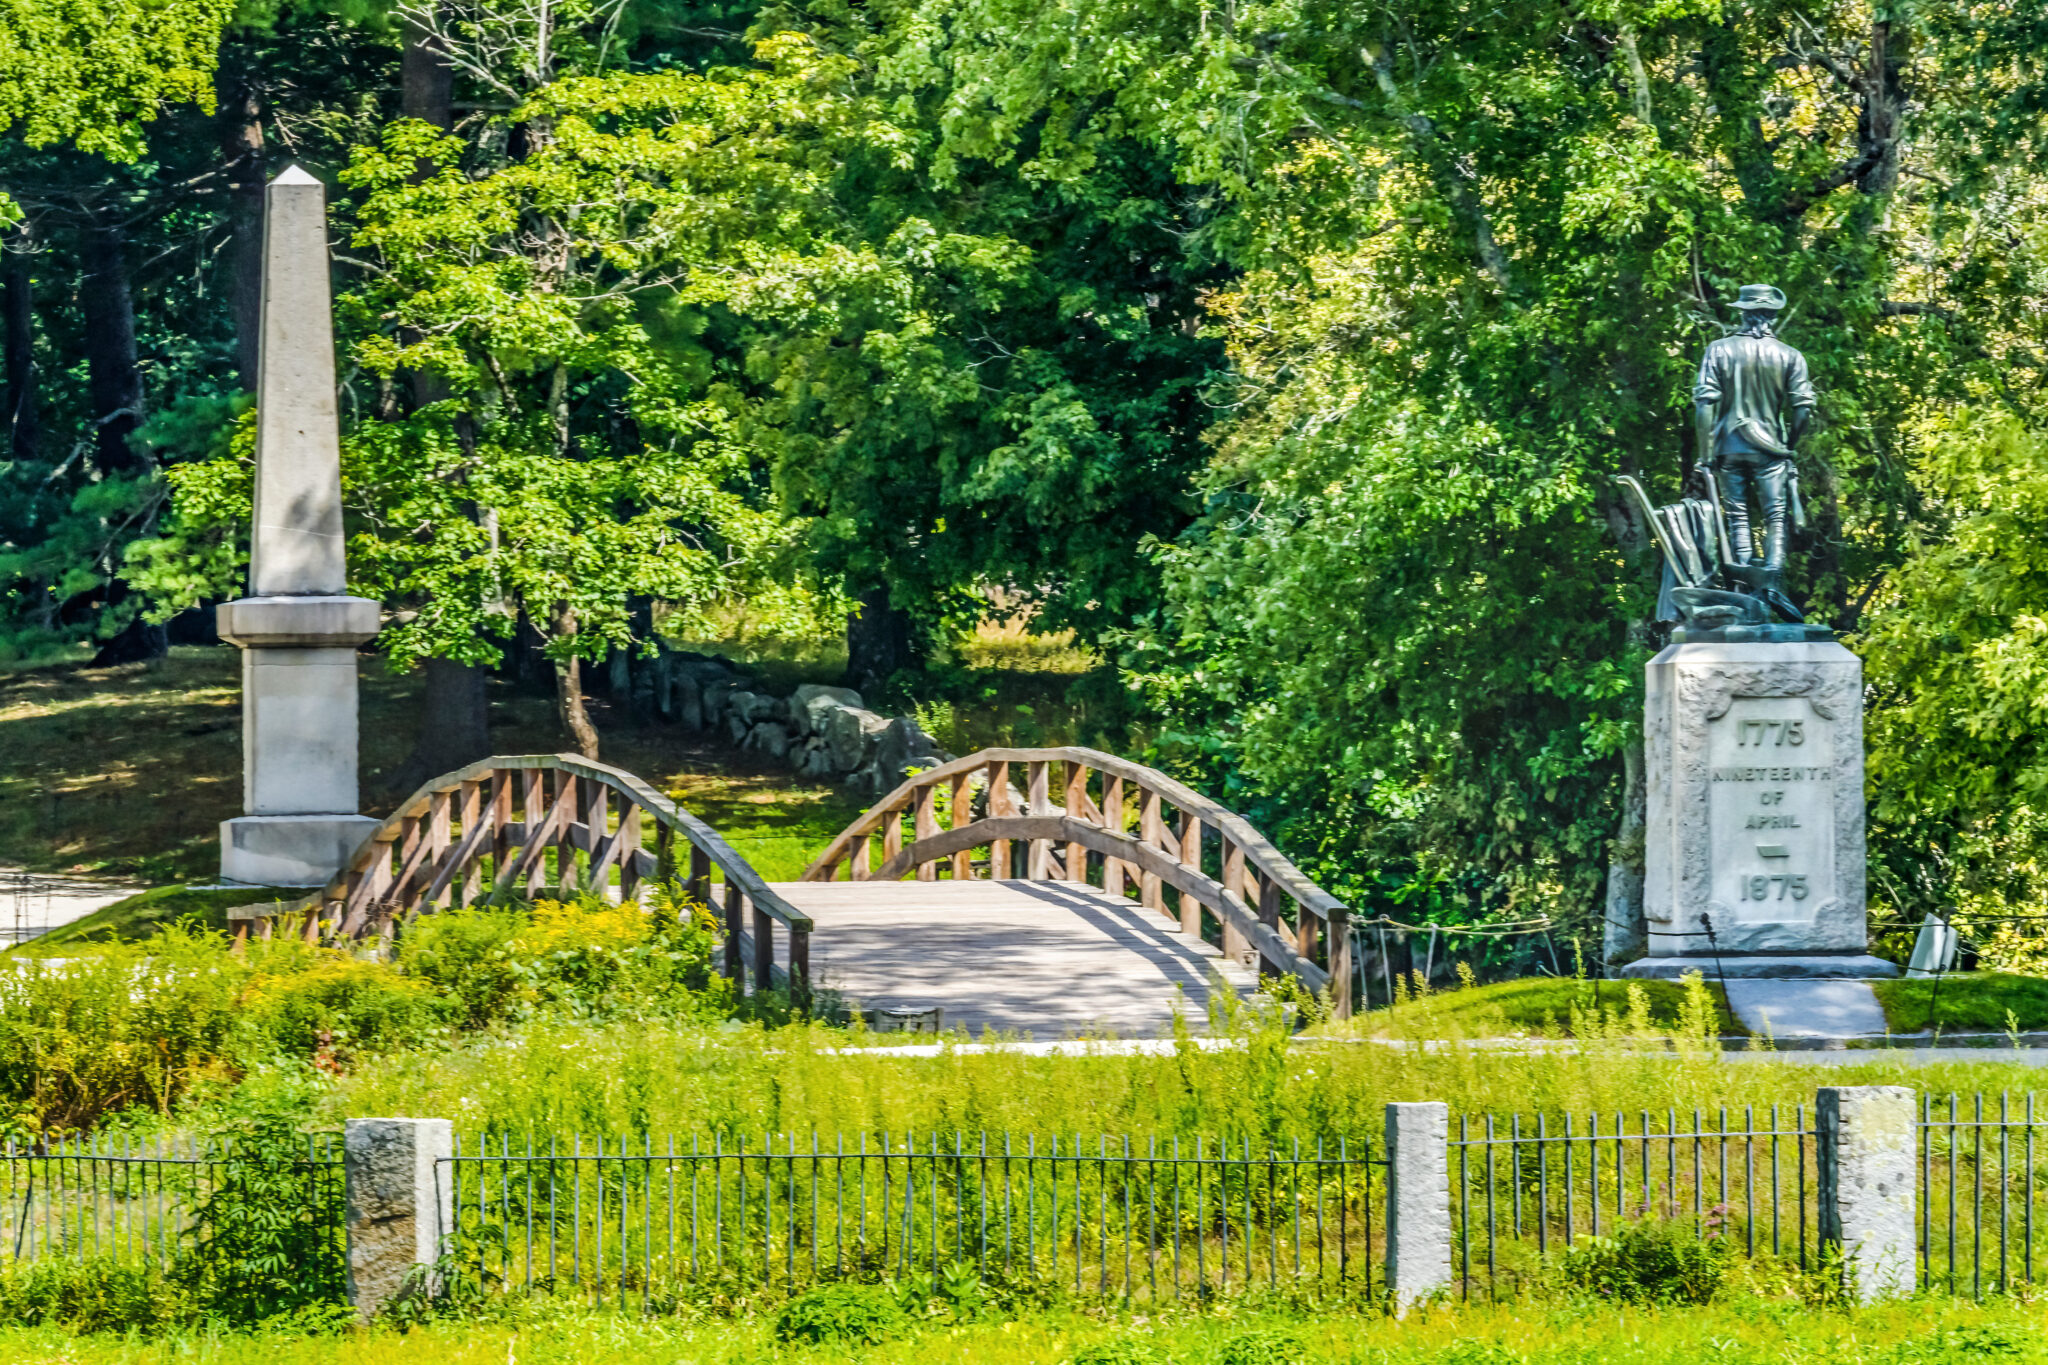 Photo is of the Minute Man Statue and the Old North Bridge in the Minute Man National Park. Both are surrounded by green grass and trees.